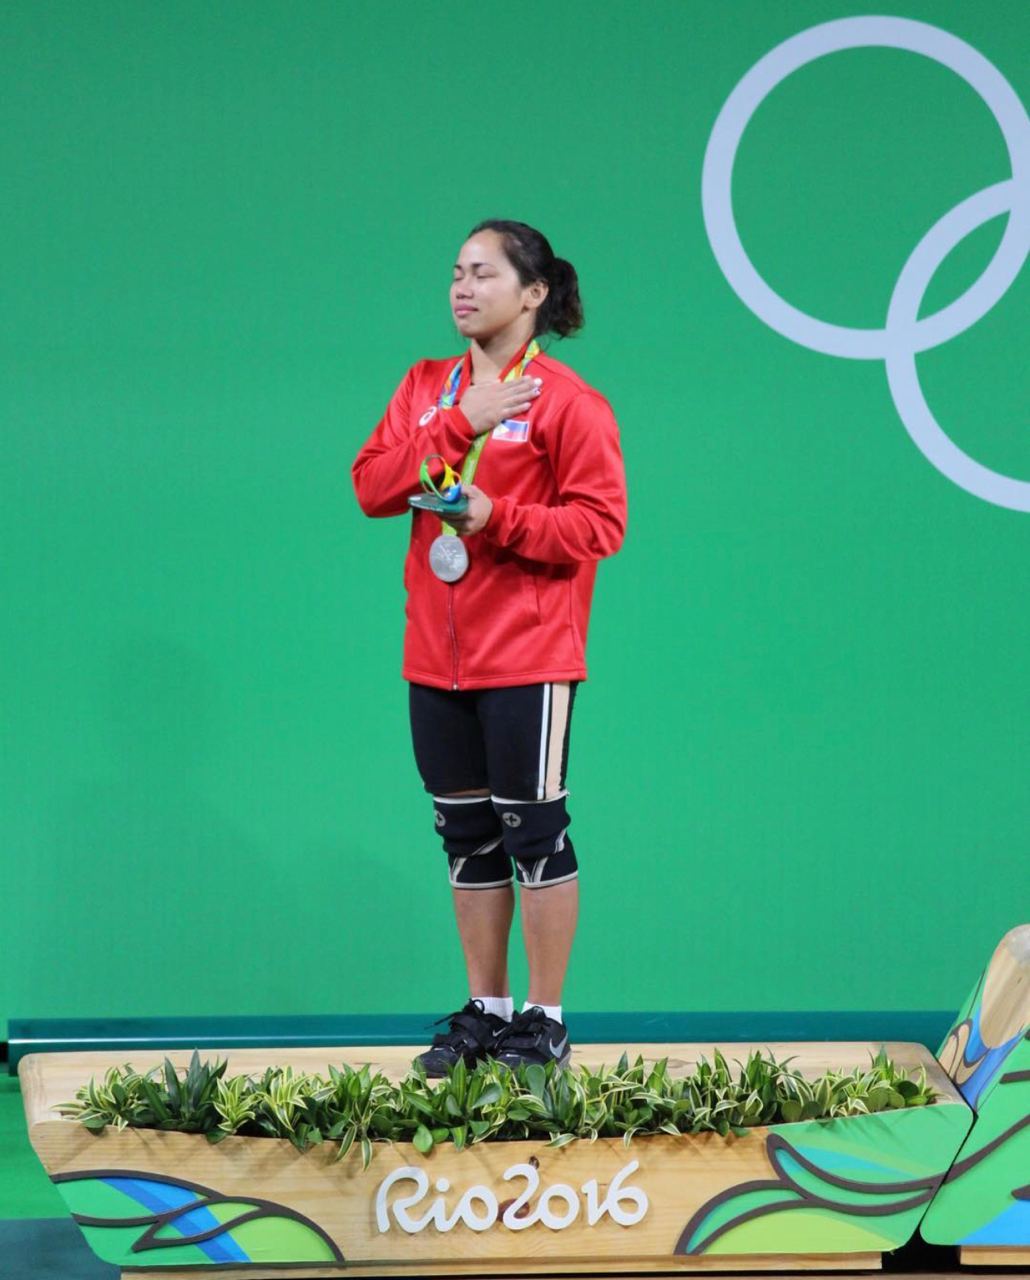 Hidilyn wins her first Olympic medal at the 2016 Rio Olympics